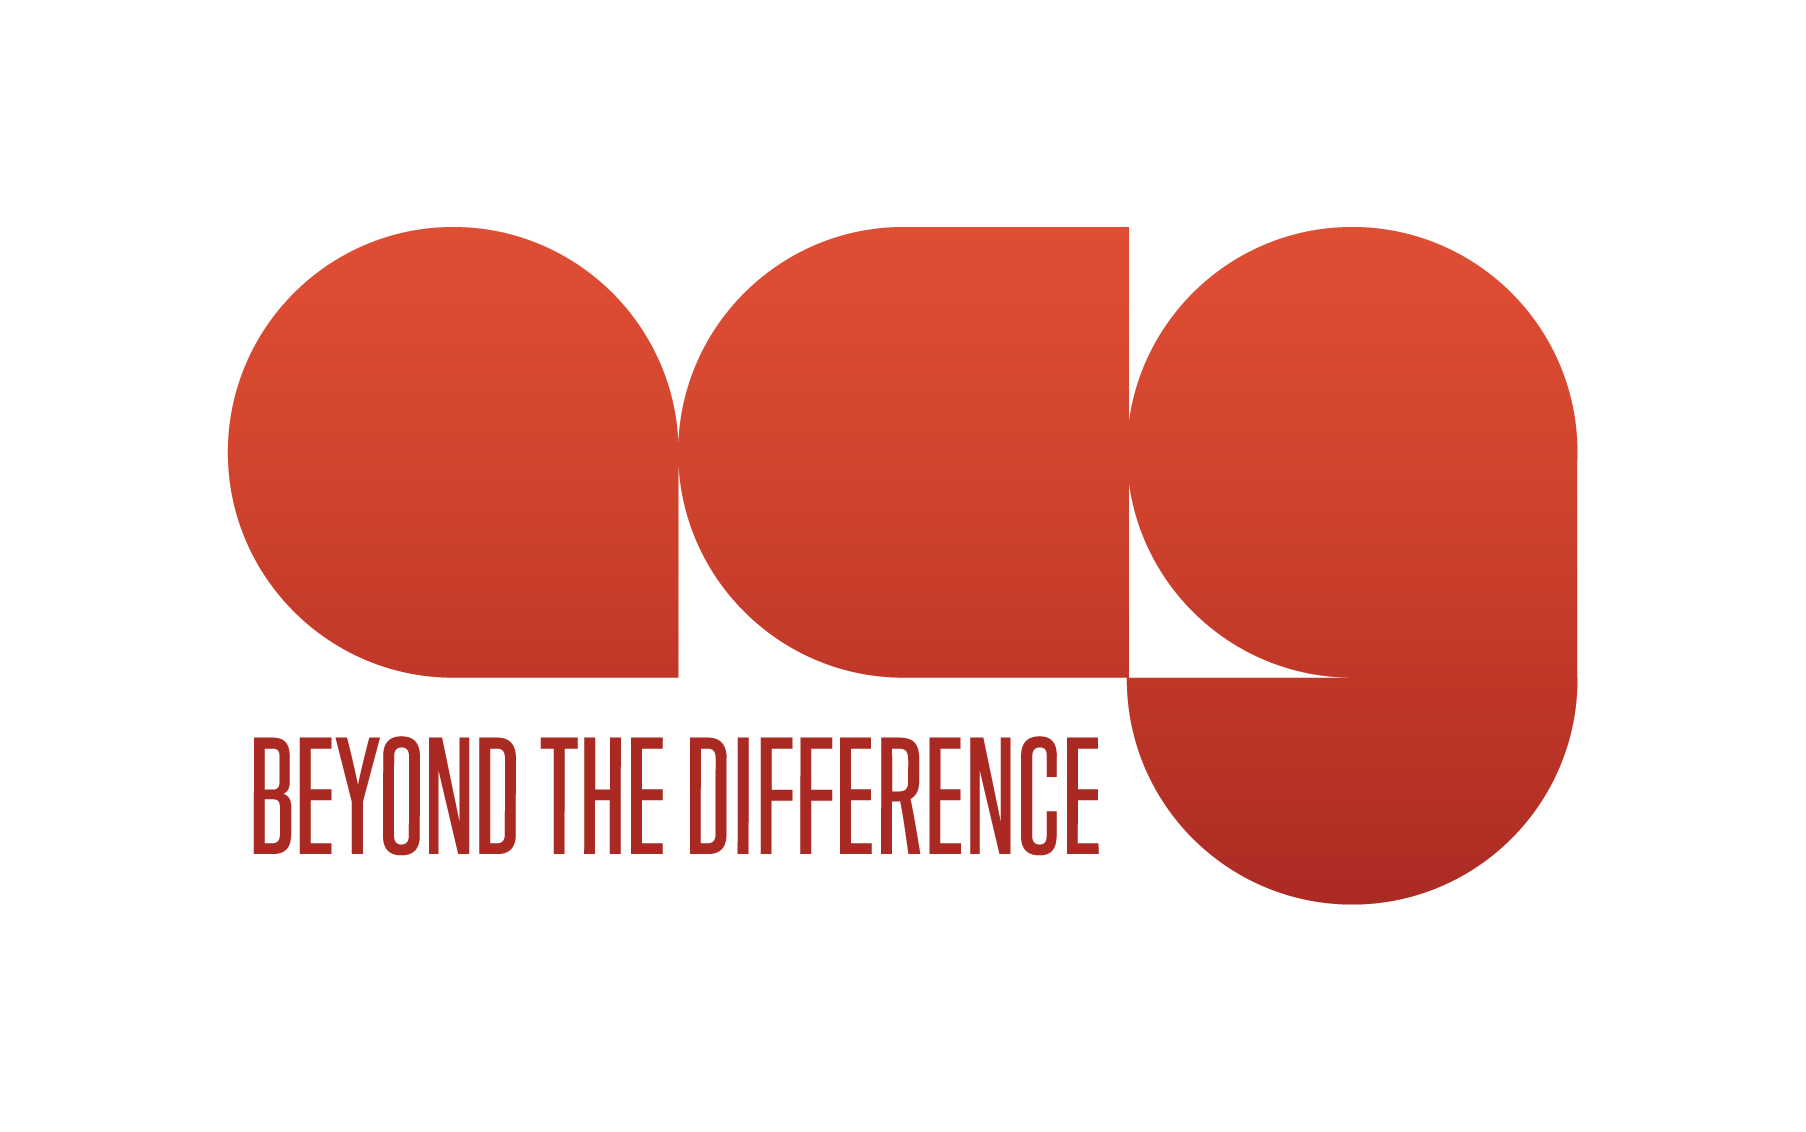 ACG logo_red.png